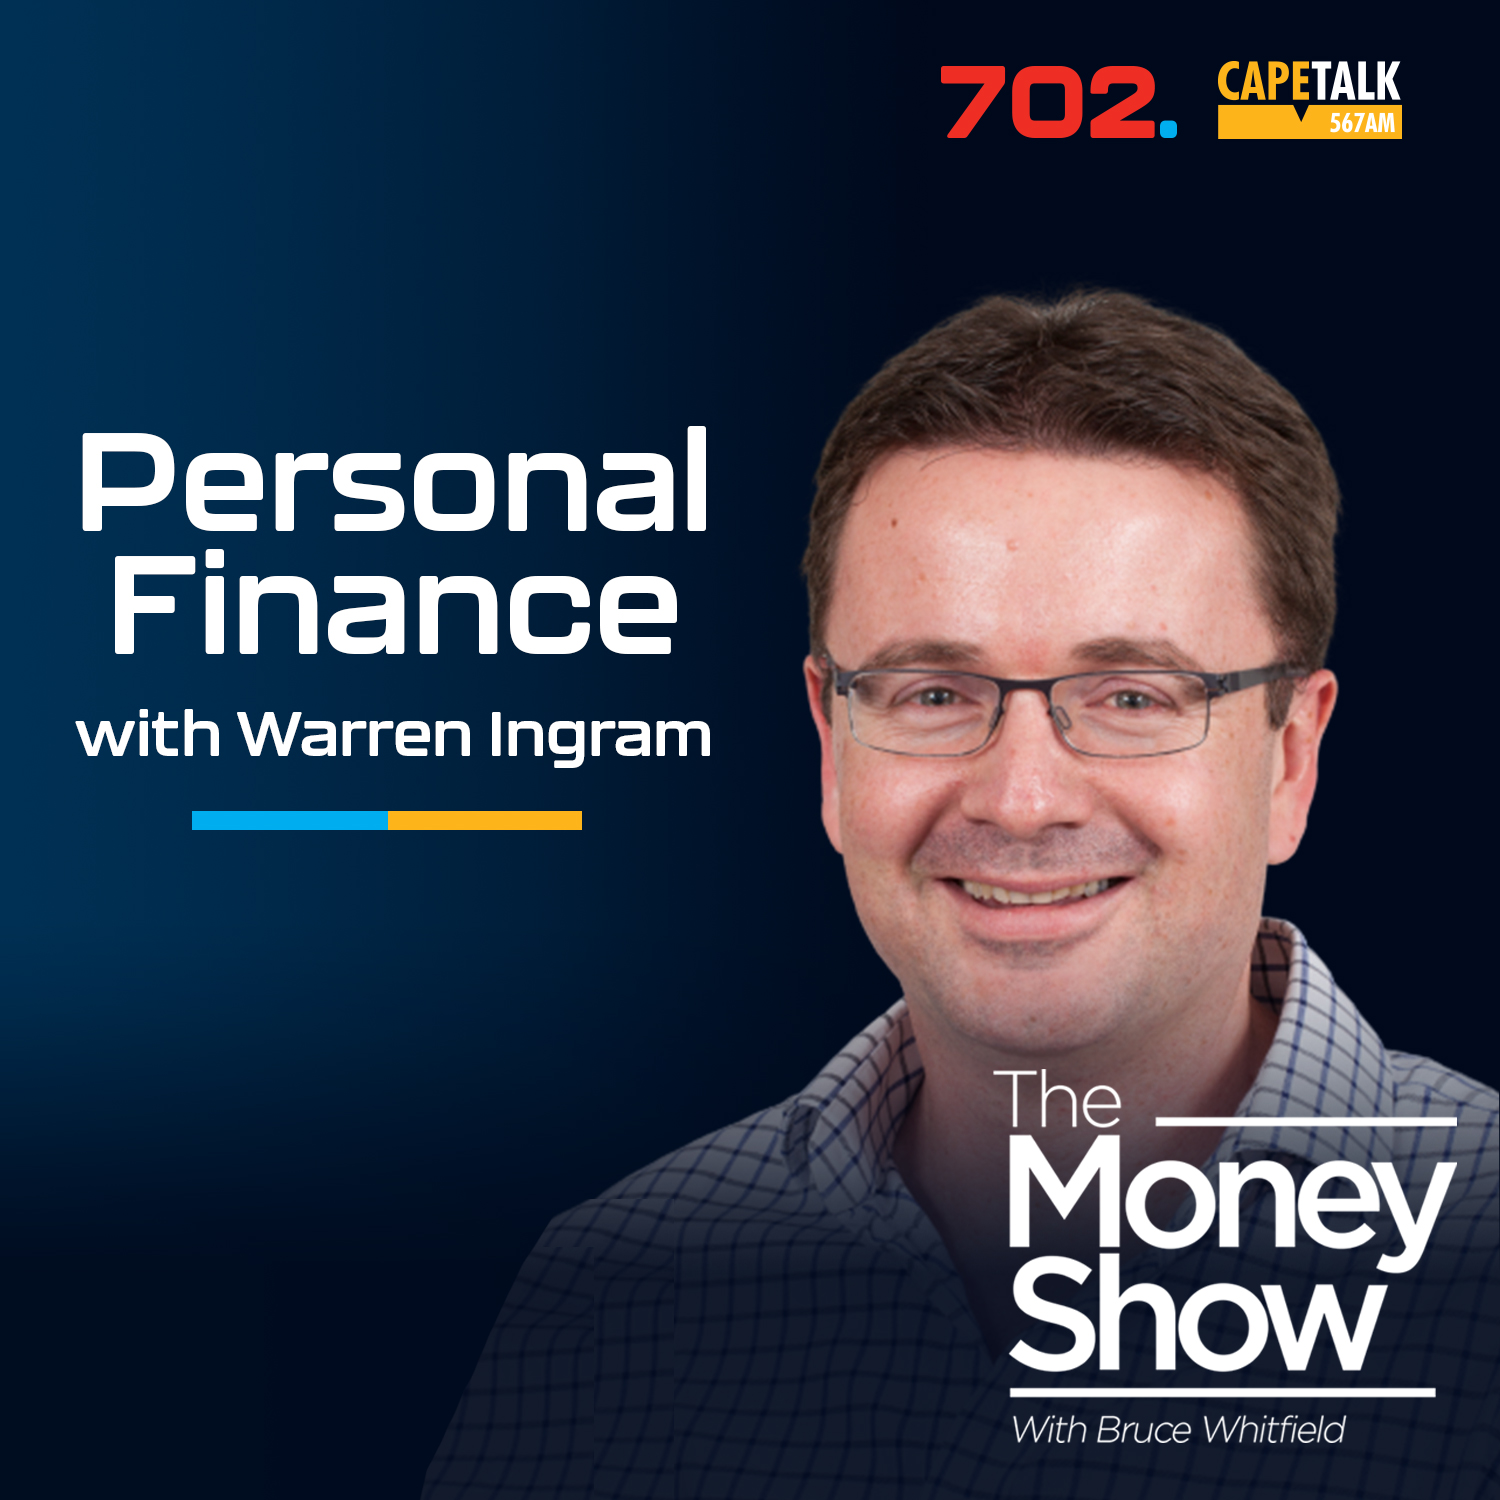 Personal Finance - How to build generational wealth.